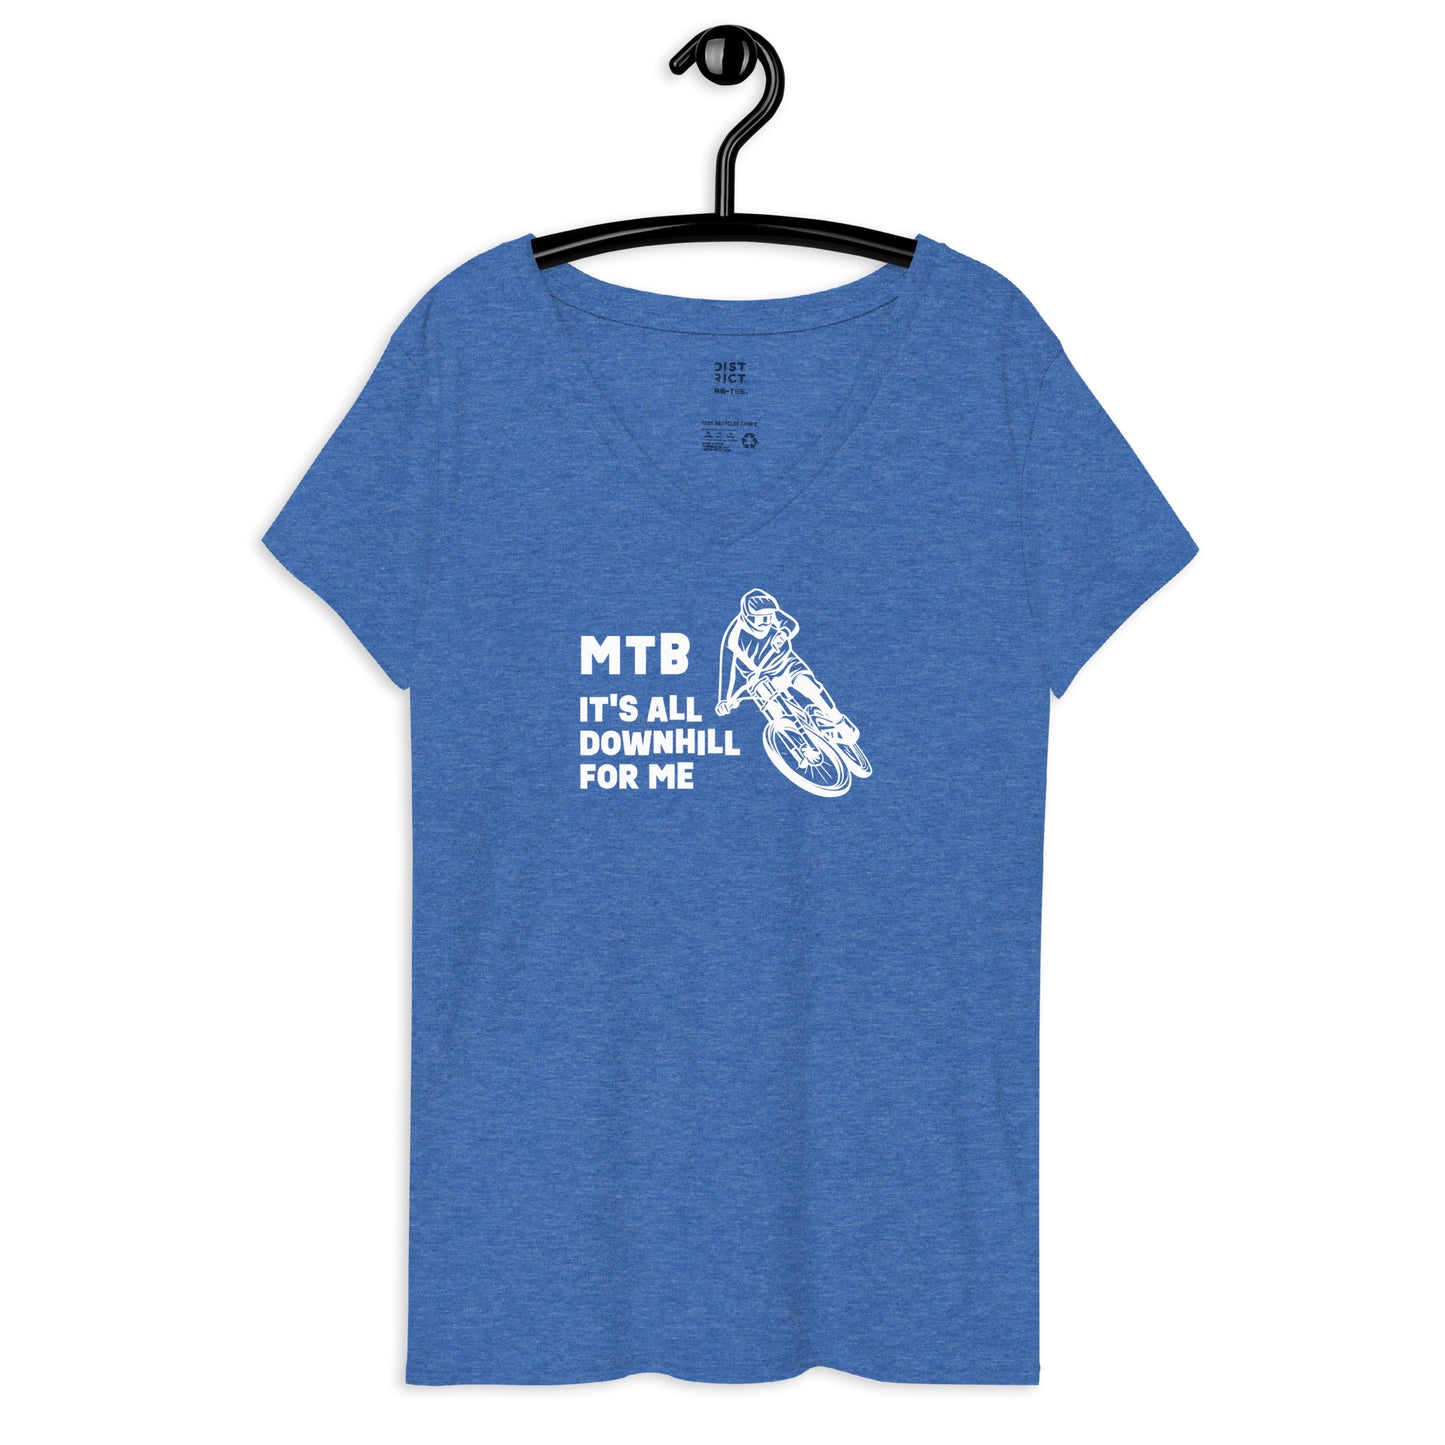 It's All Downhill (white) - Women’s recycled v-neck t-shirt